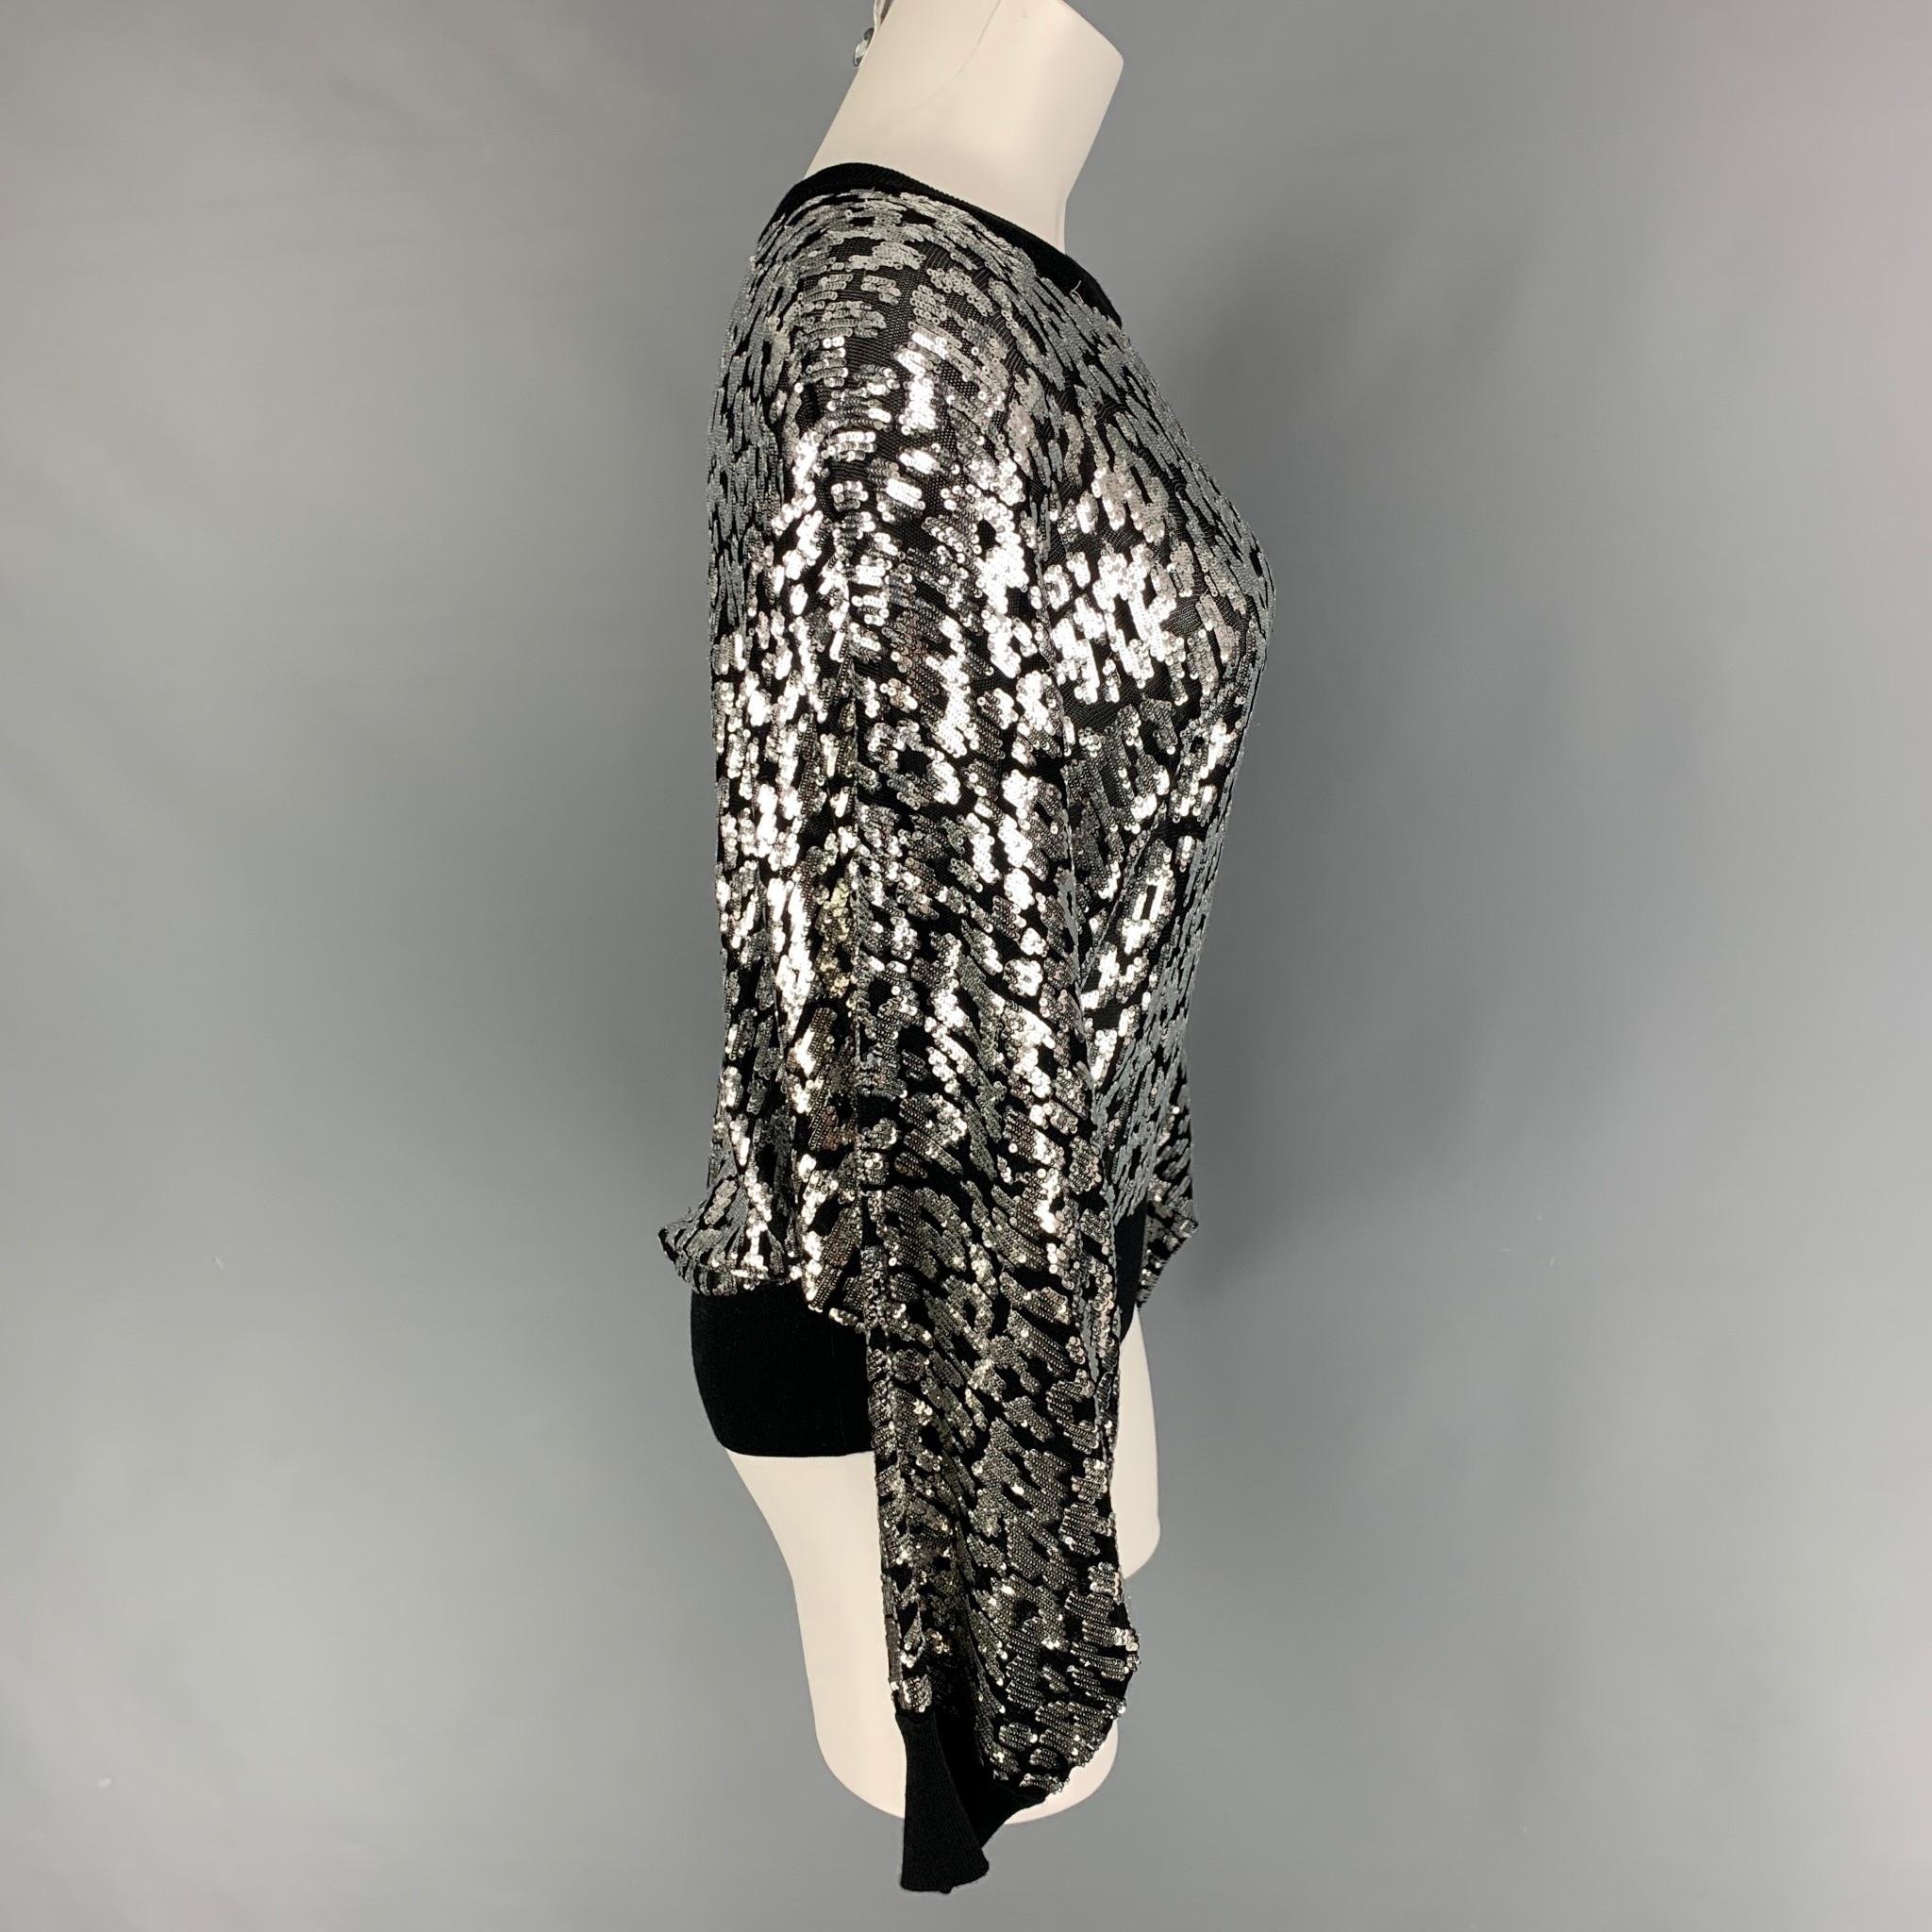 MICHAEL KORS COLLECTION pullover comes in a black & silver sequin viscose featuring a bat wing and a crew-neck. 

Excellent Pre-Owned Condition.
Marked: M

Measurements:

Shoulder: 16.5 in.
Sleeve: 27 in.
Length: 22 in. 